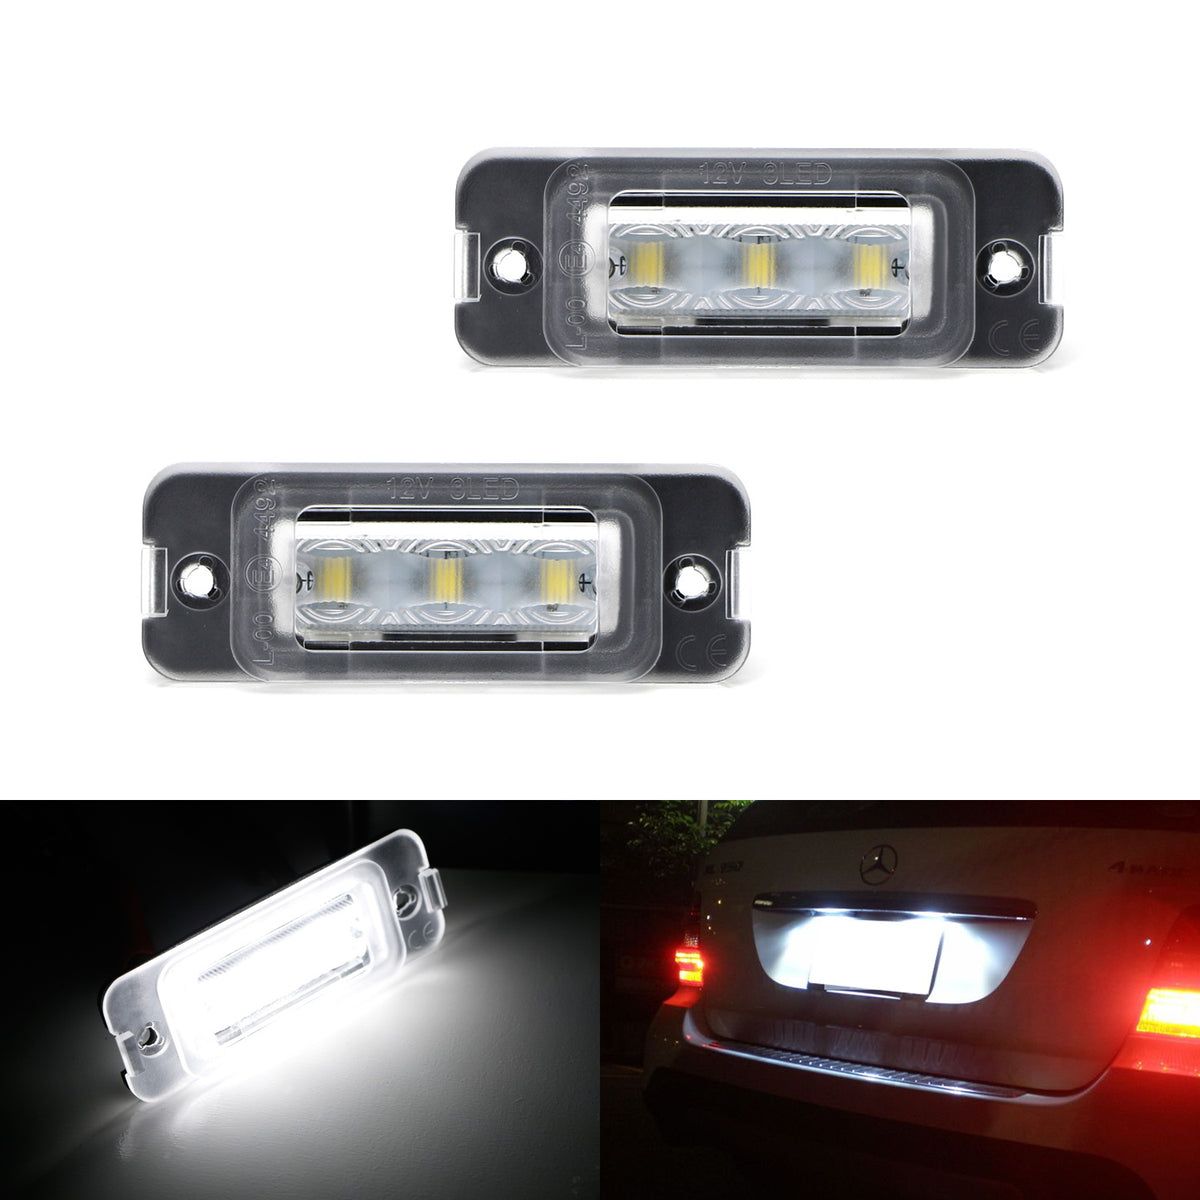 iJDMTOY 24-SMD Error Free LED License Plate Light Lamps For BMW 1 2 3 4 5  Series X3 X4 X5 X6 